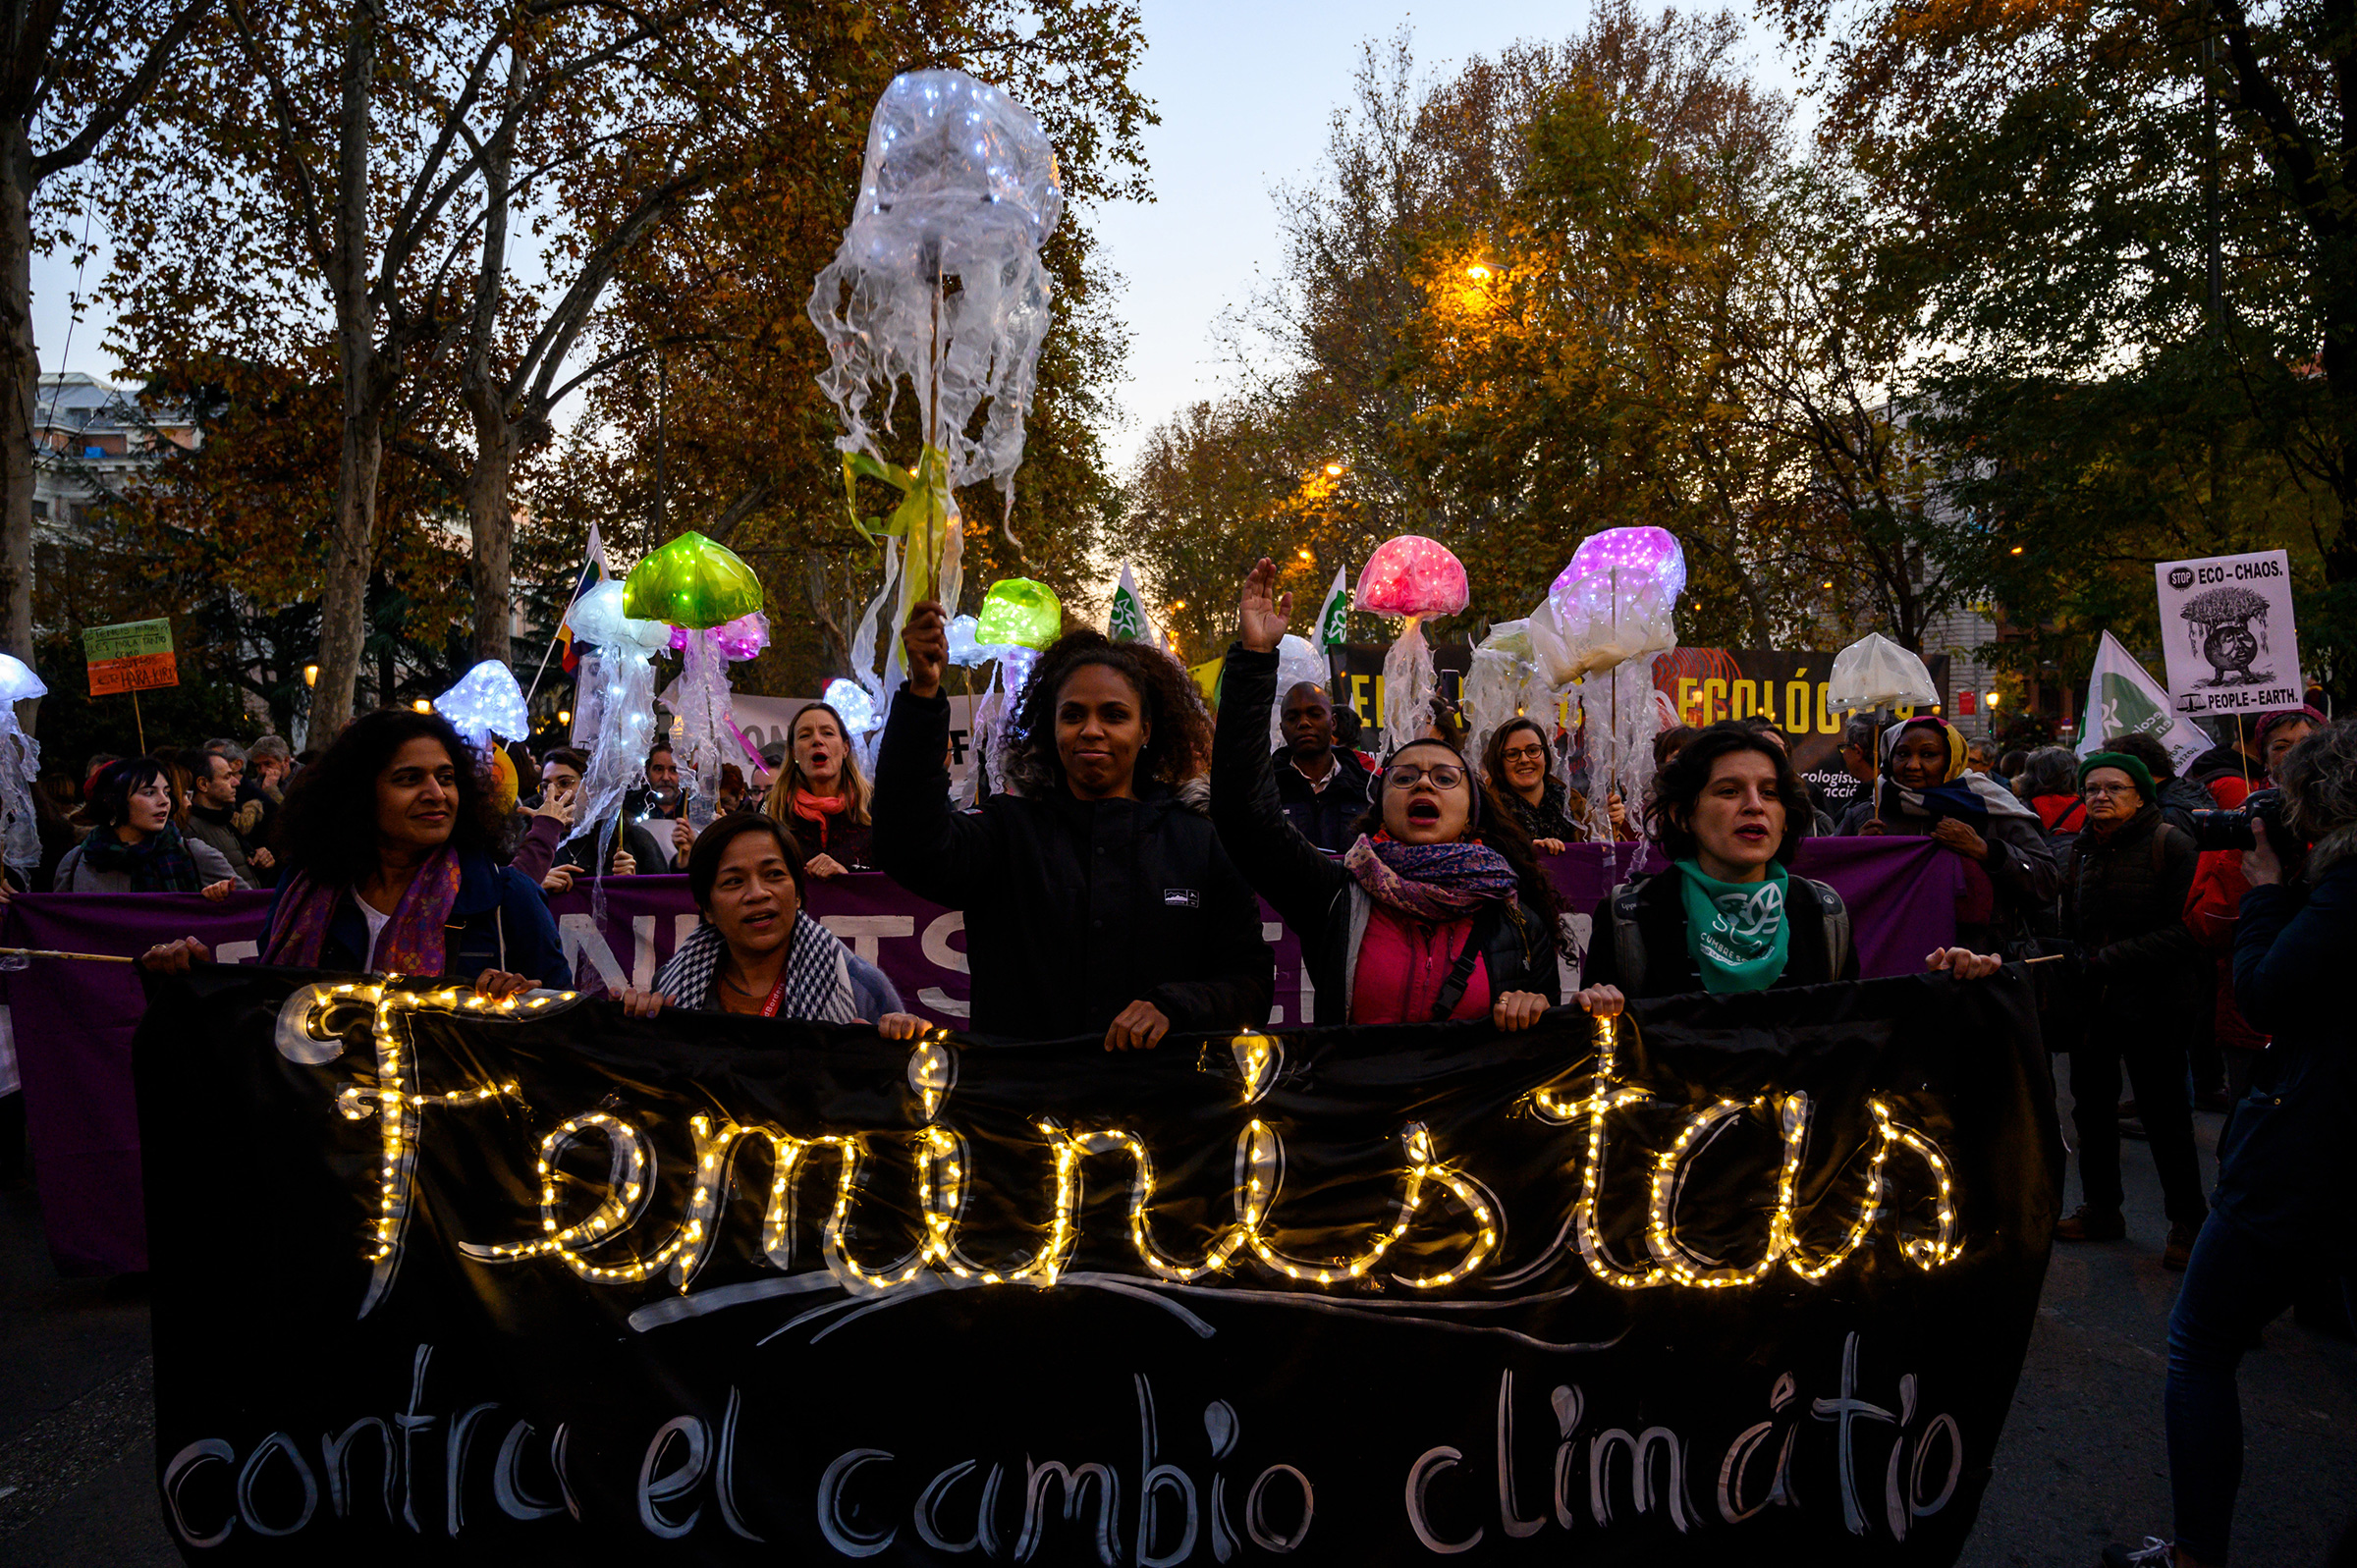 Women hold a banner that reads “Feminists against climate change” at a 2019 protest in Madrid.